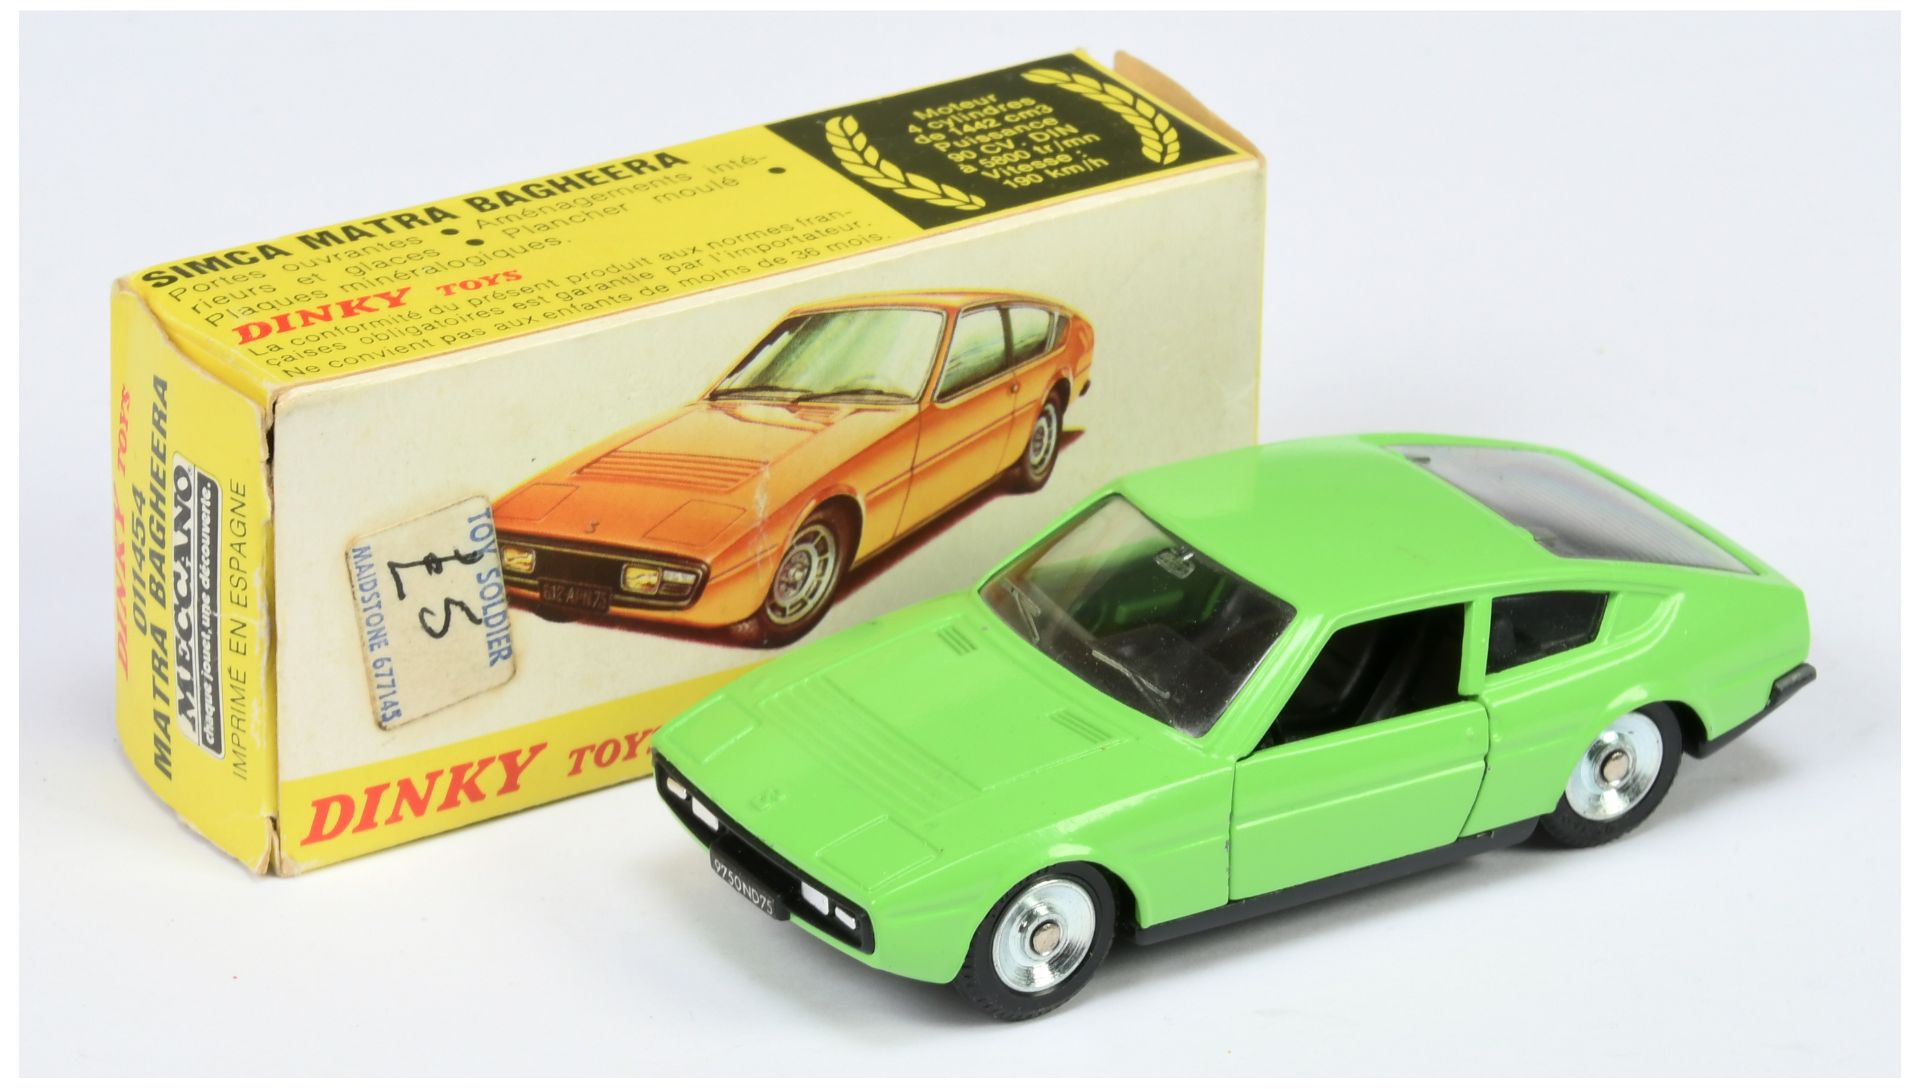 Spanish Dinky Toys 011454 Simca Matra Bagheera - Green body, black body and base, concave hubs